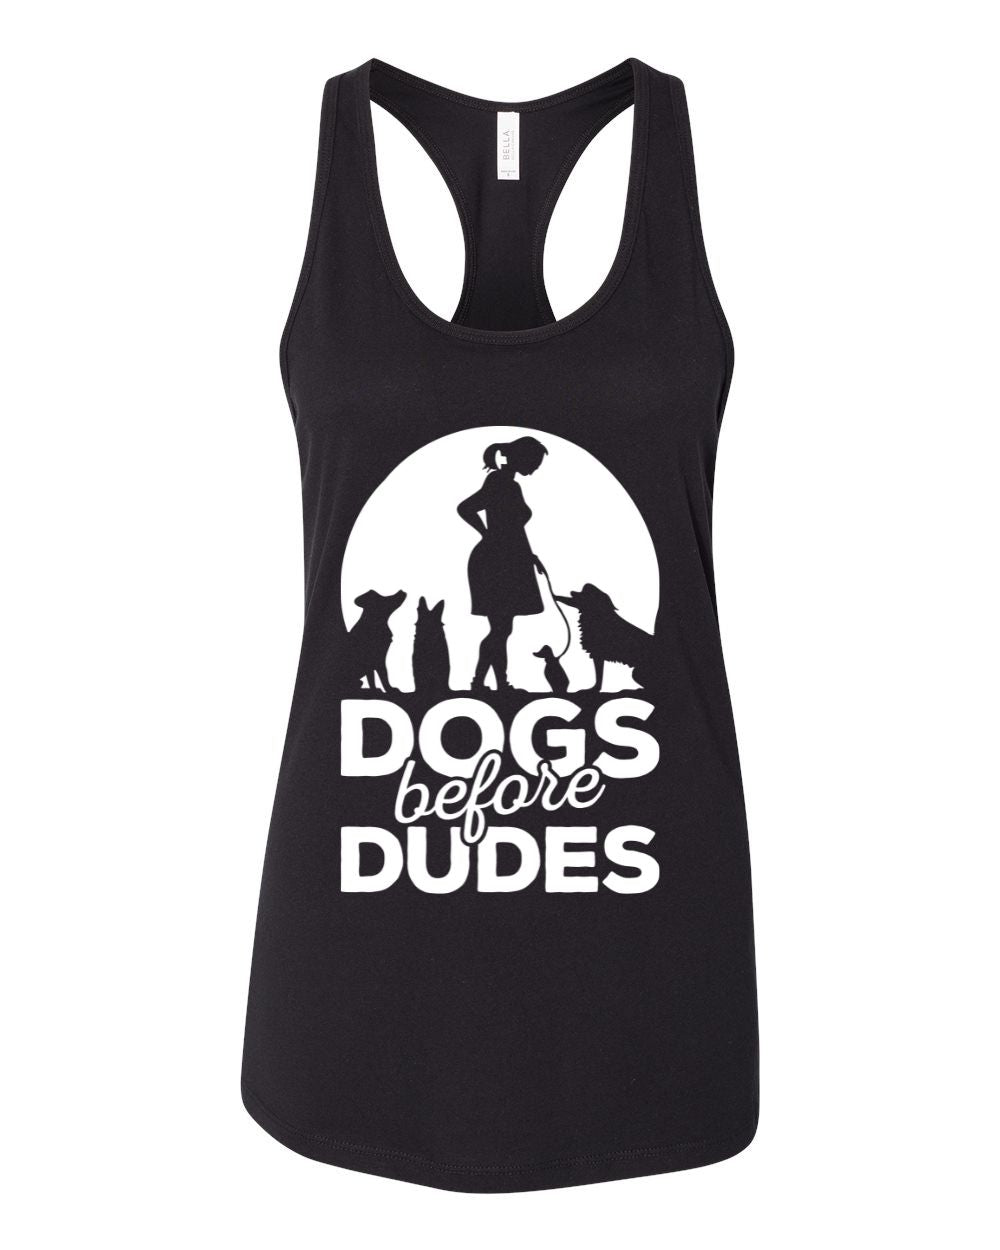 Dogs Before Dudes Tank Top